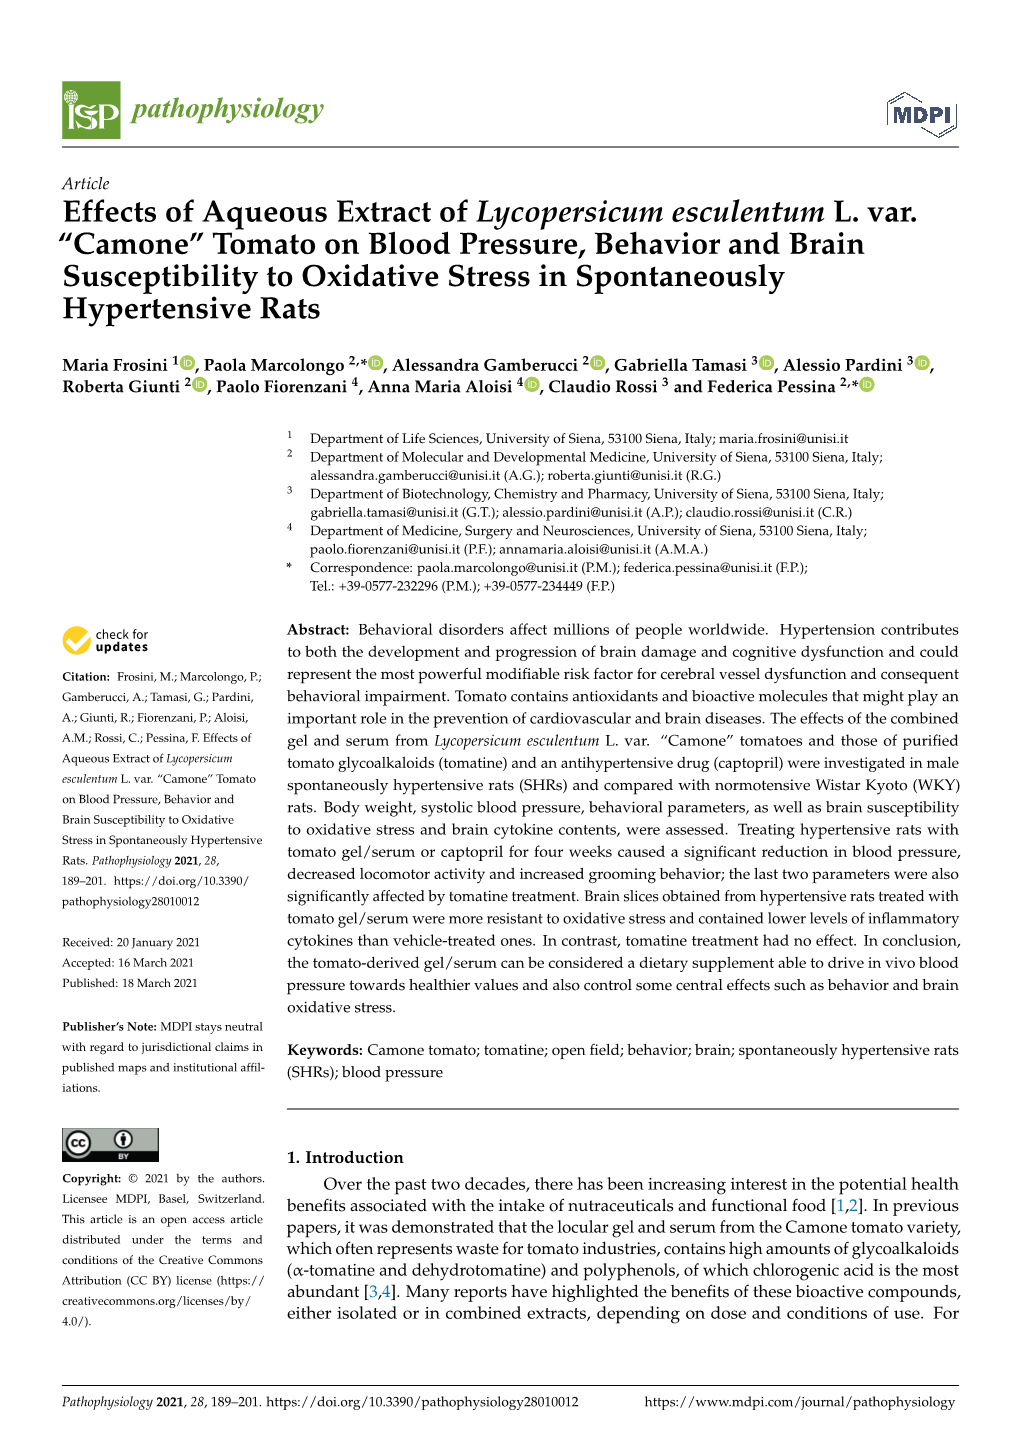 Camone” Tomato on Blood Pressure, Behavior and Brain Susceptibility to Oxidative Stress in Spontaneously Hypertensive Rats